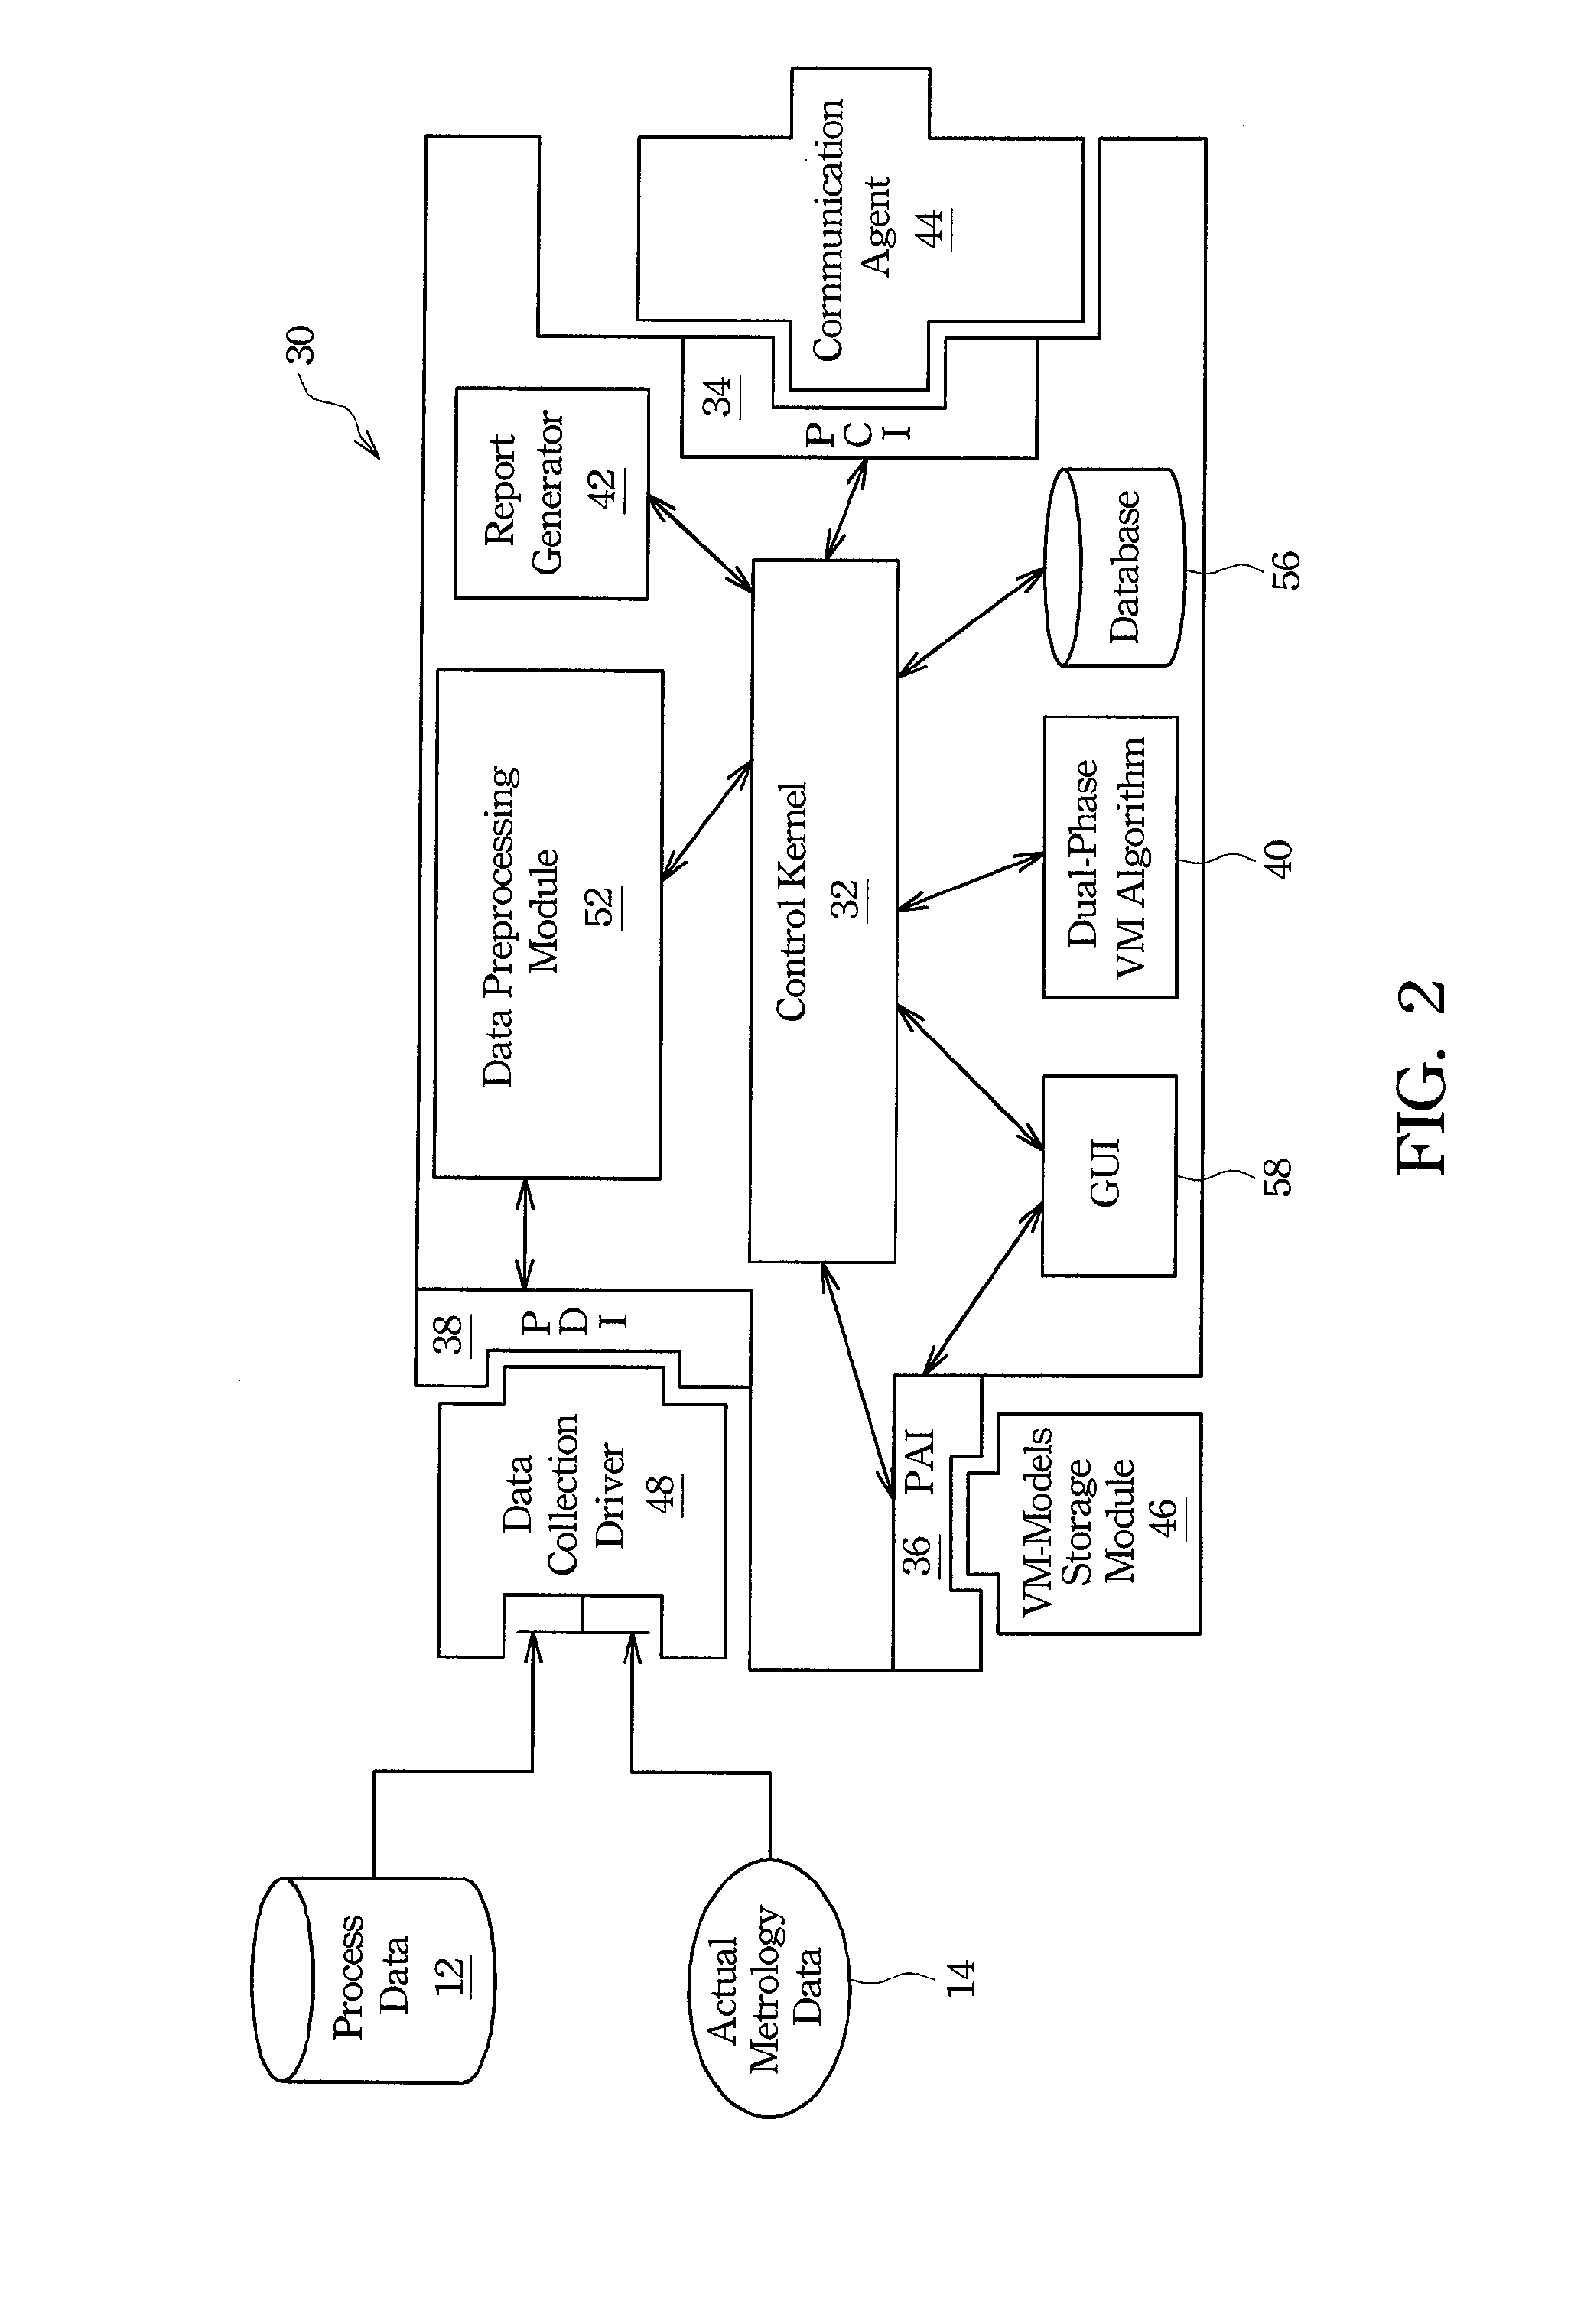 System and Method for Automatic Virtual Metrology